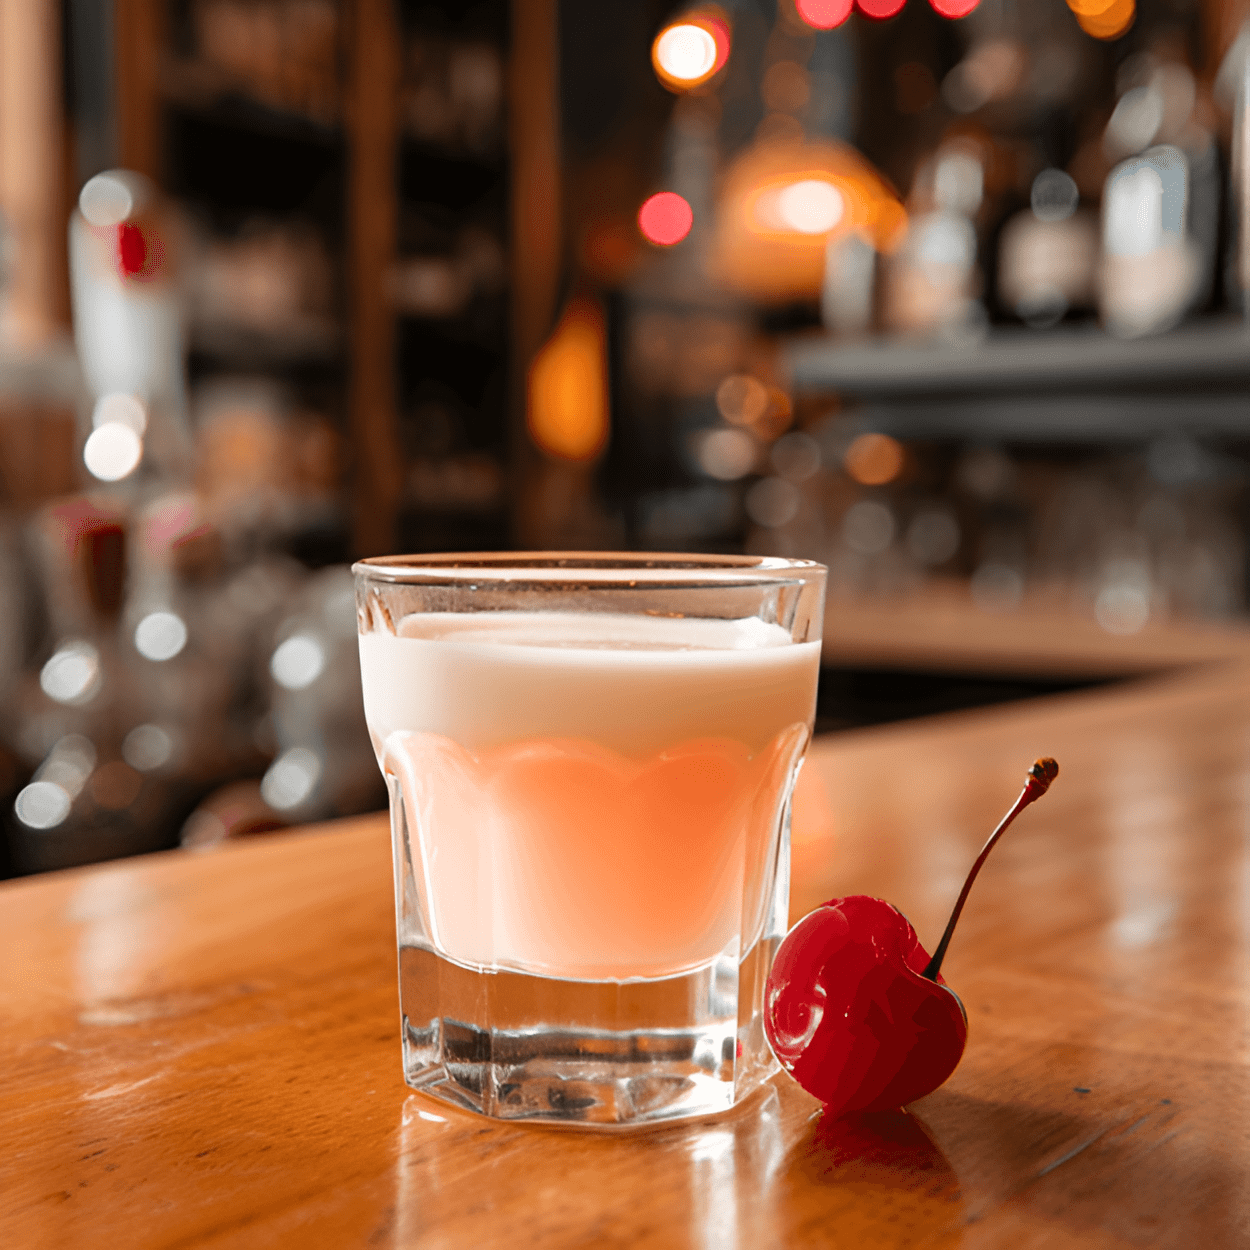 Brain Hemorrhage Recipe - The Brain Hemorrhage has a sweet, creamy taste with a hint of sourness from the schnapps. The Bailey's Irish Cream gives it a smooth, velvety texture.